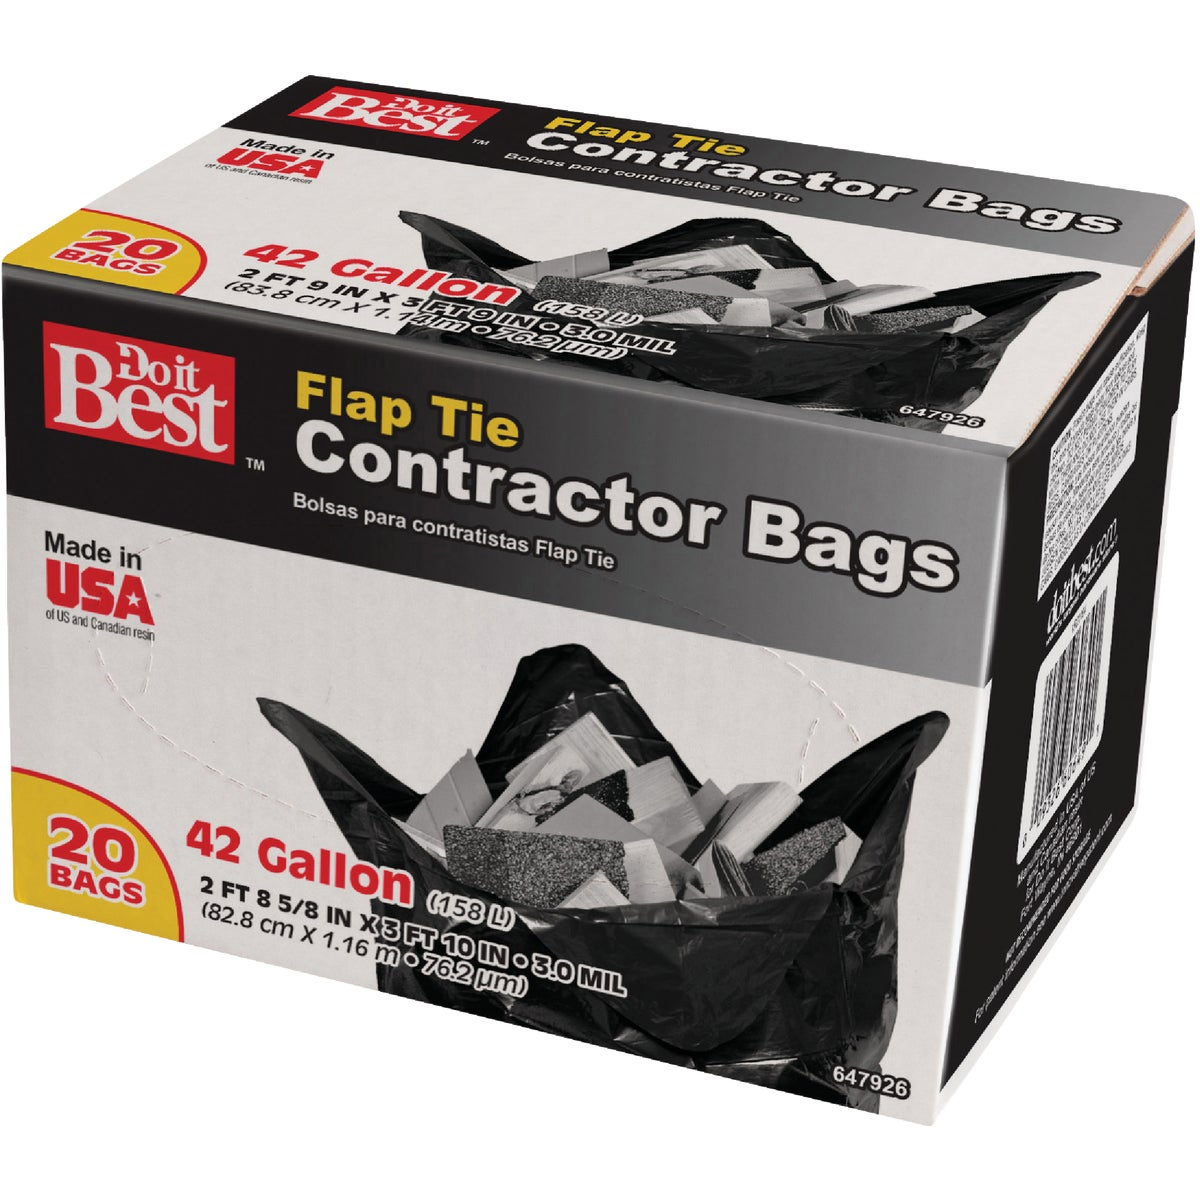 Aserson Heavy Duty Contractor Trash Garbage Bags 3MIL Strengh 42 Gallon 20 Pack 